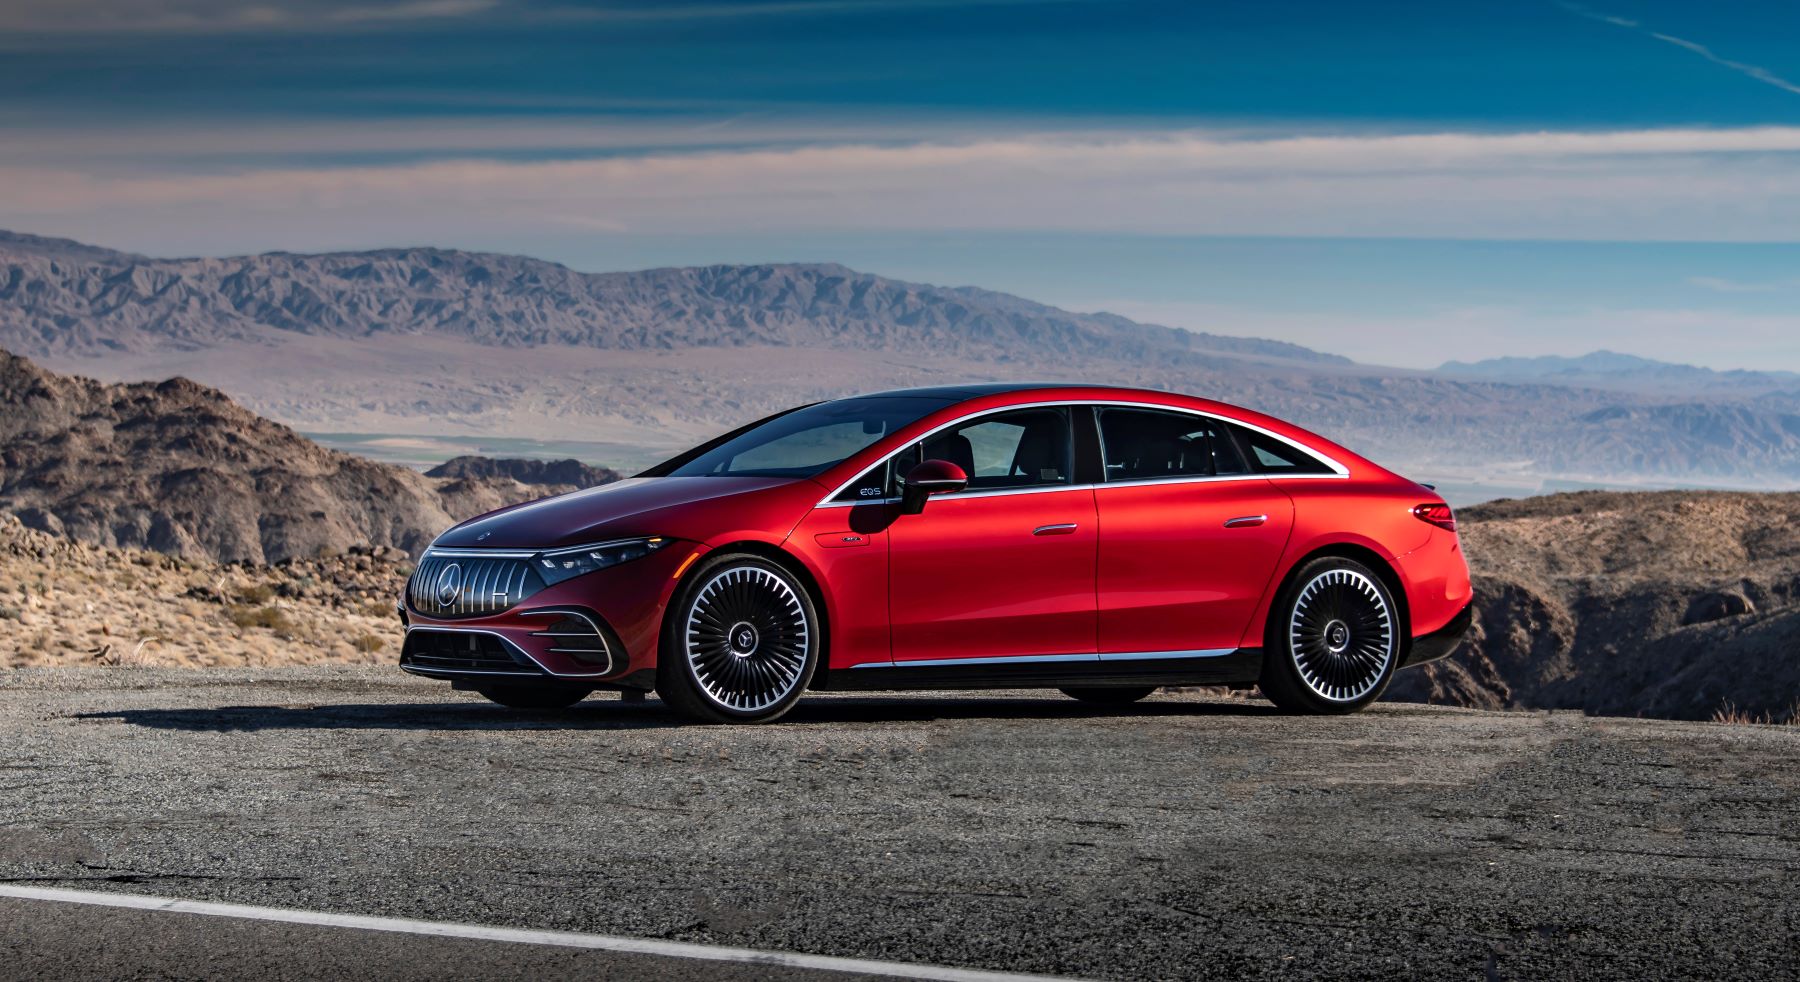 A red 2022 Mercedes-Benz AMG EQS all-electric luxury sports car sedan parked on the side of a highway road near the sea